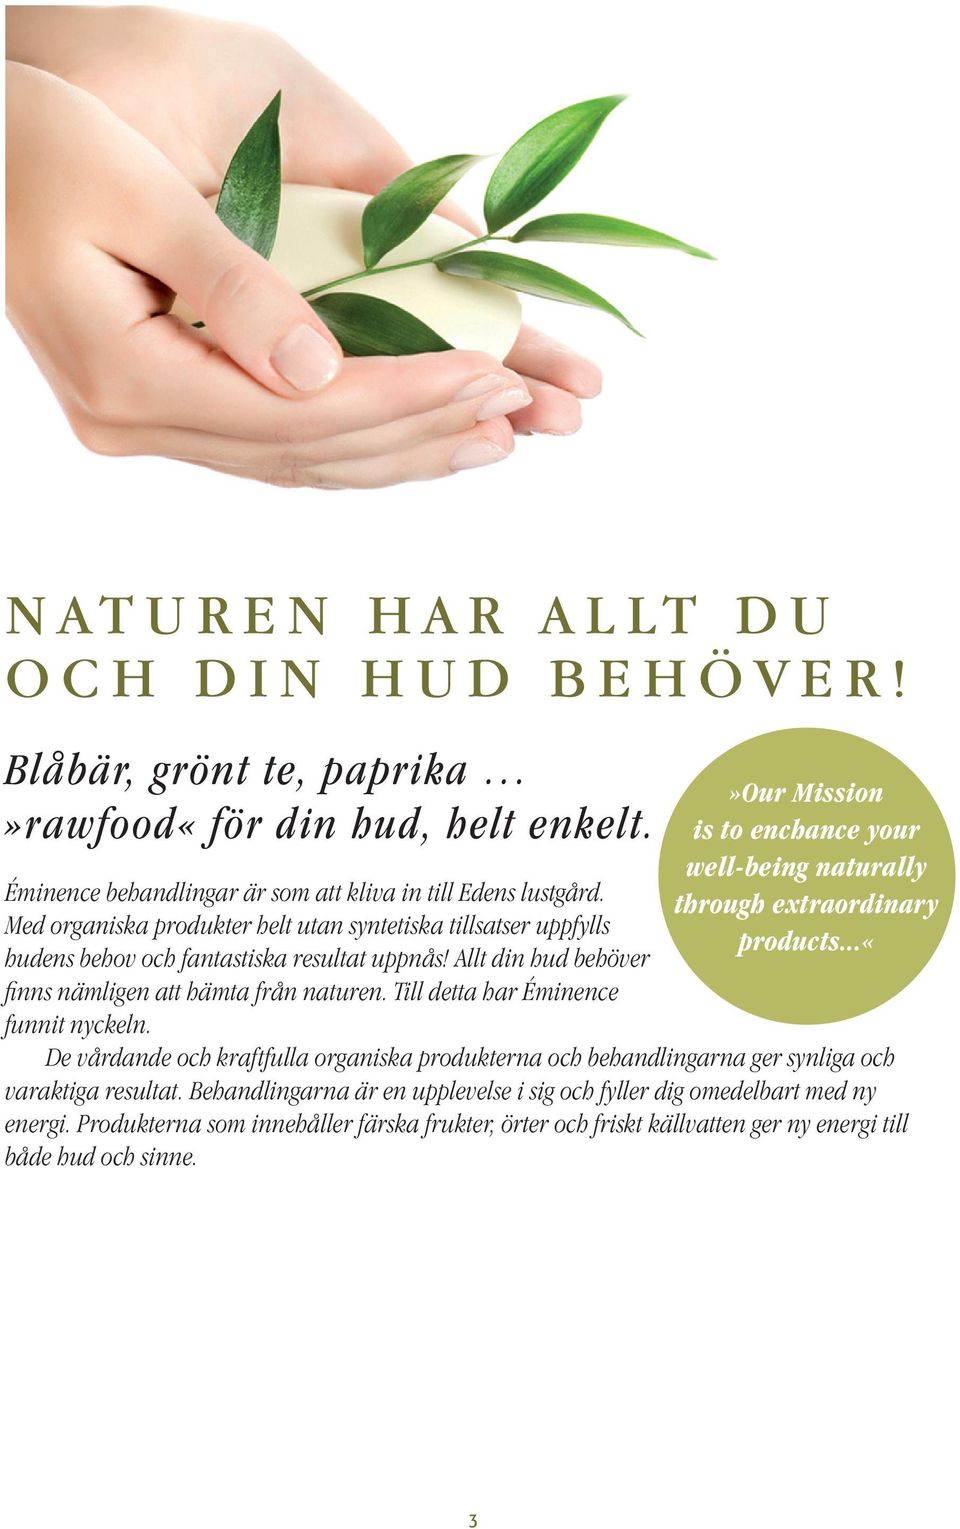 Till detta har Éminence funnit nyckeln.»our Mission is to enchance your well-being naturally through extraordinary products.